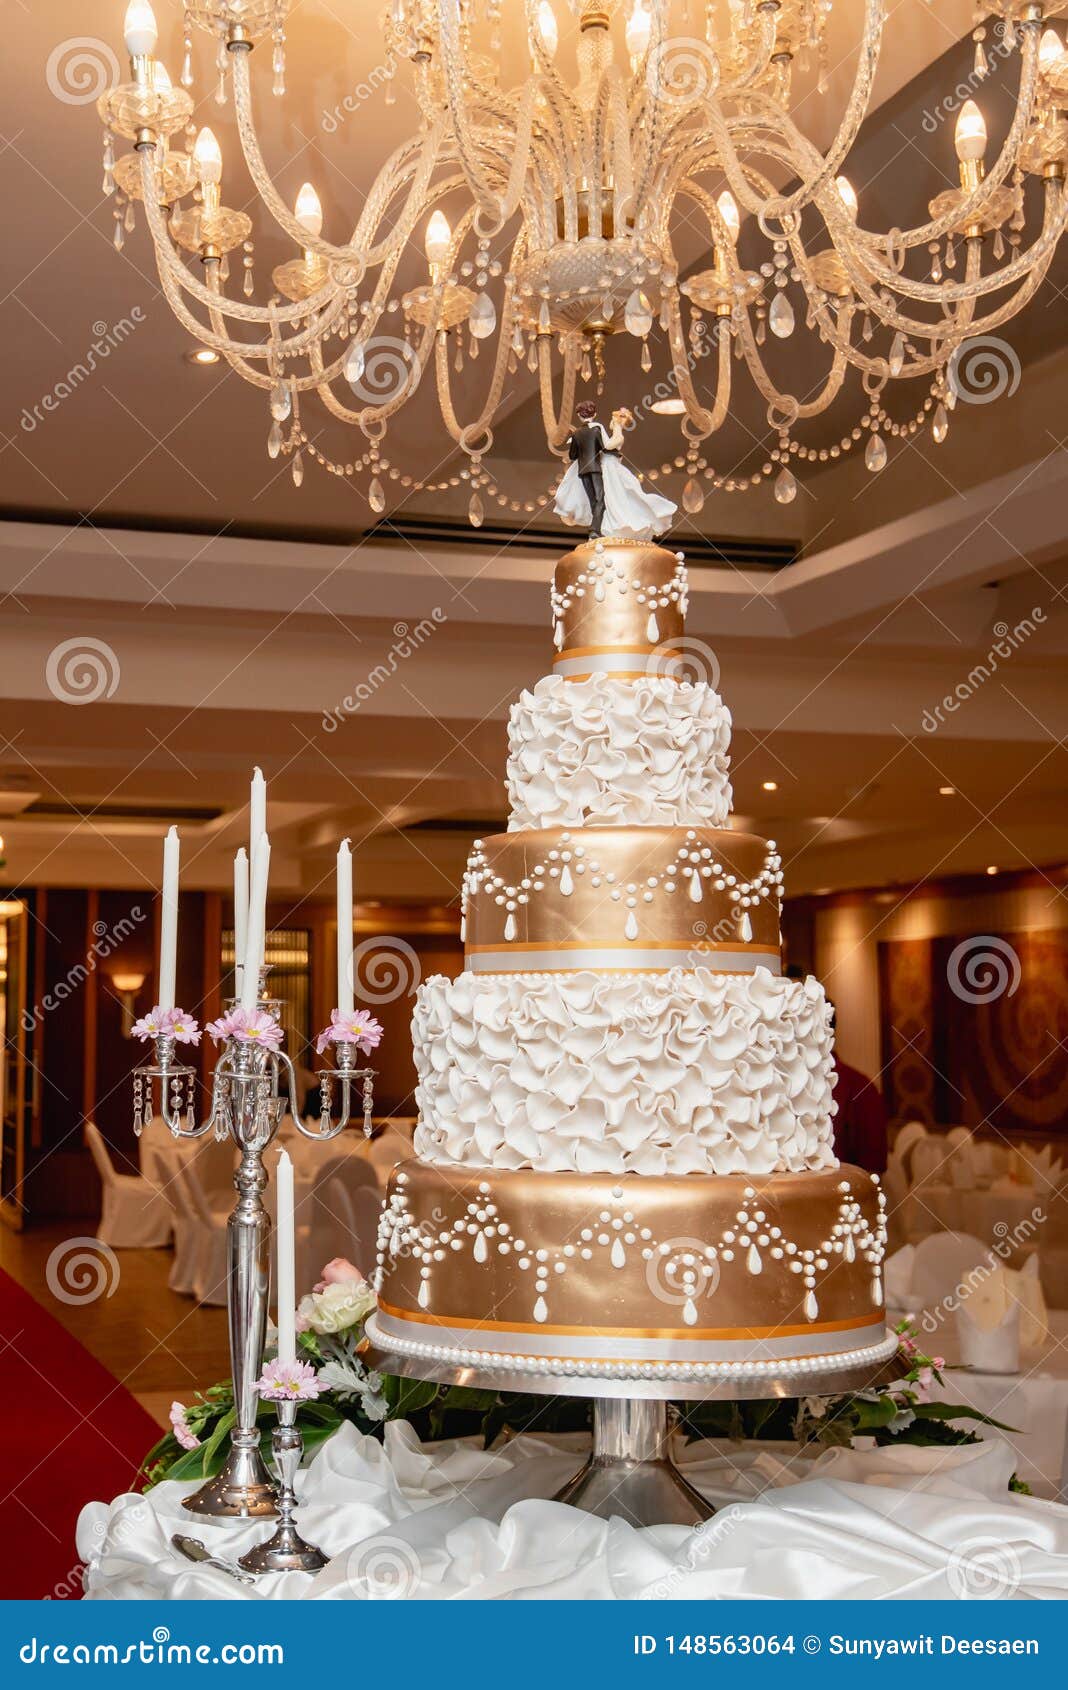 Top more than 73 beautiful wedding cakes best